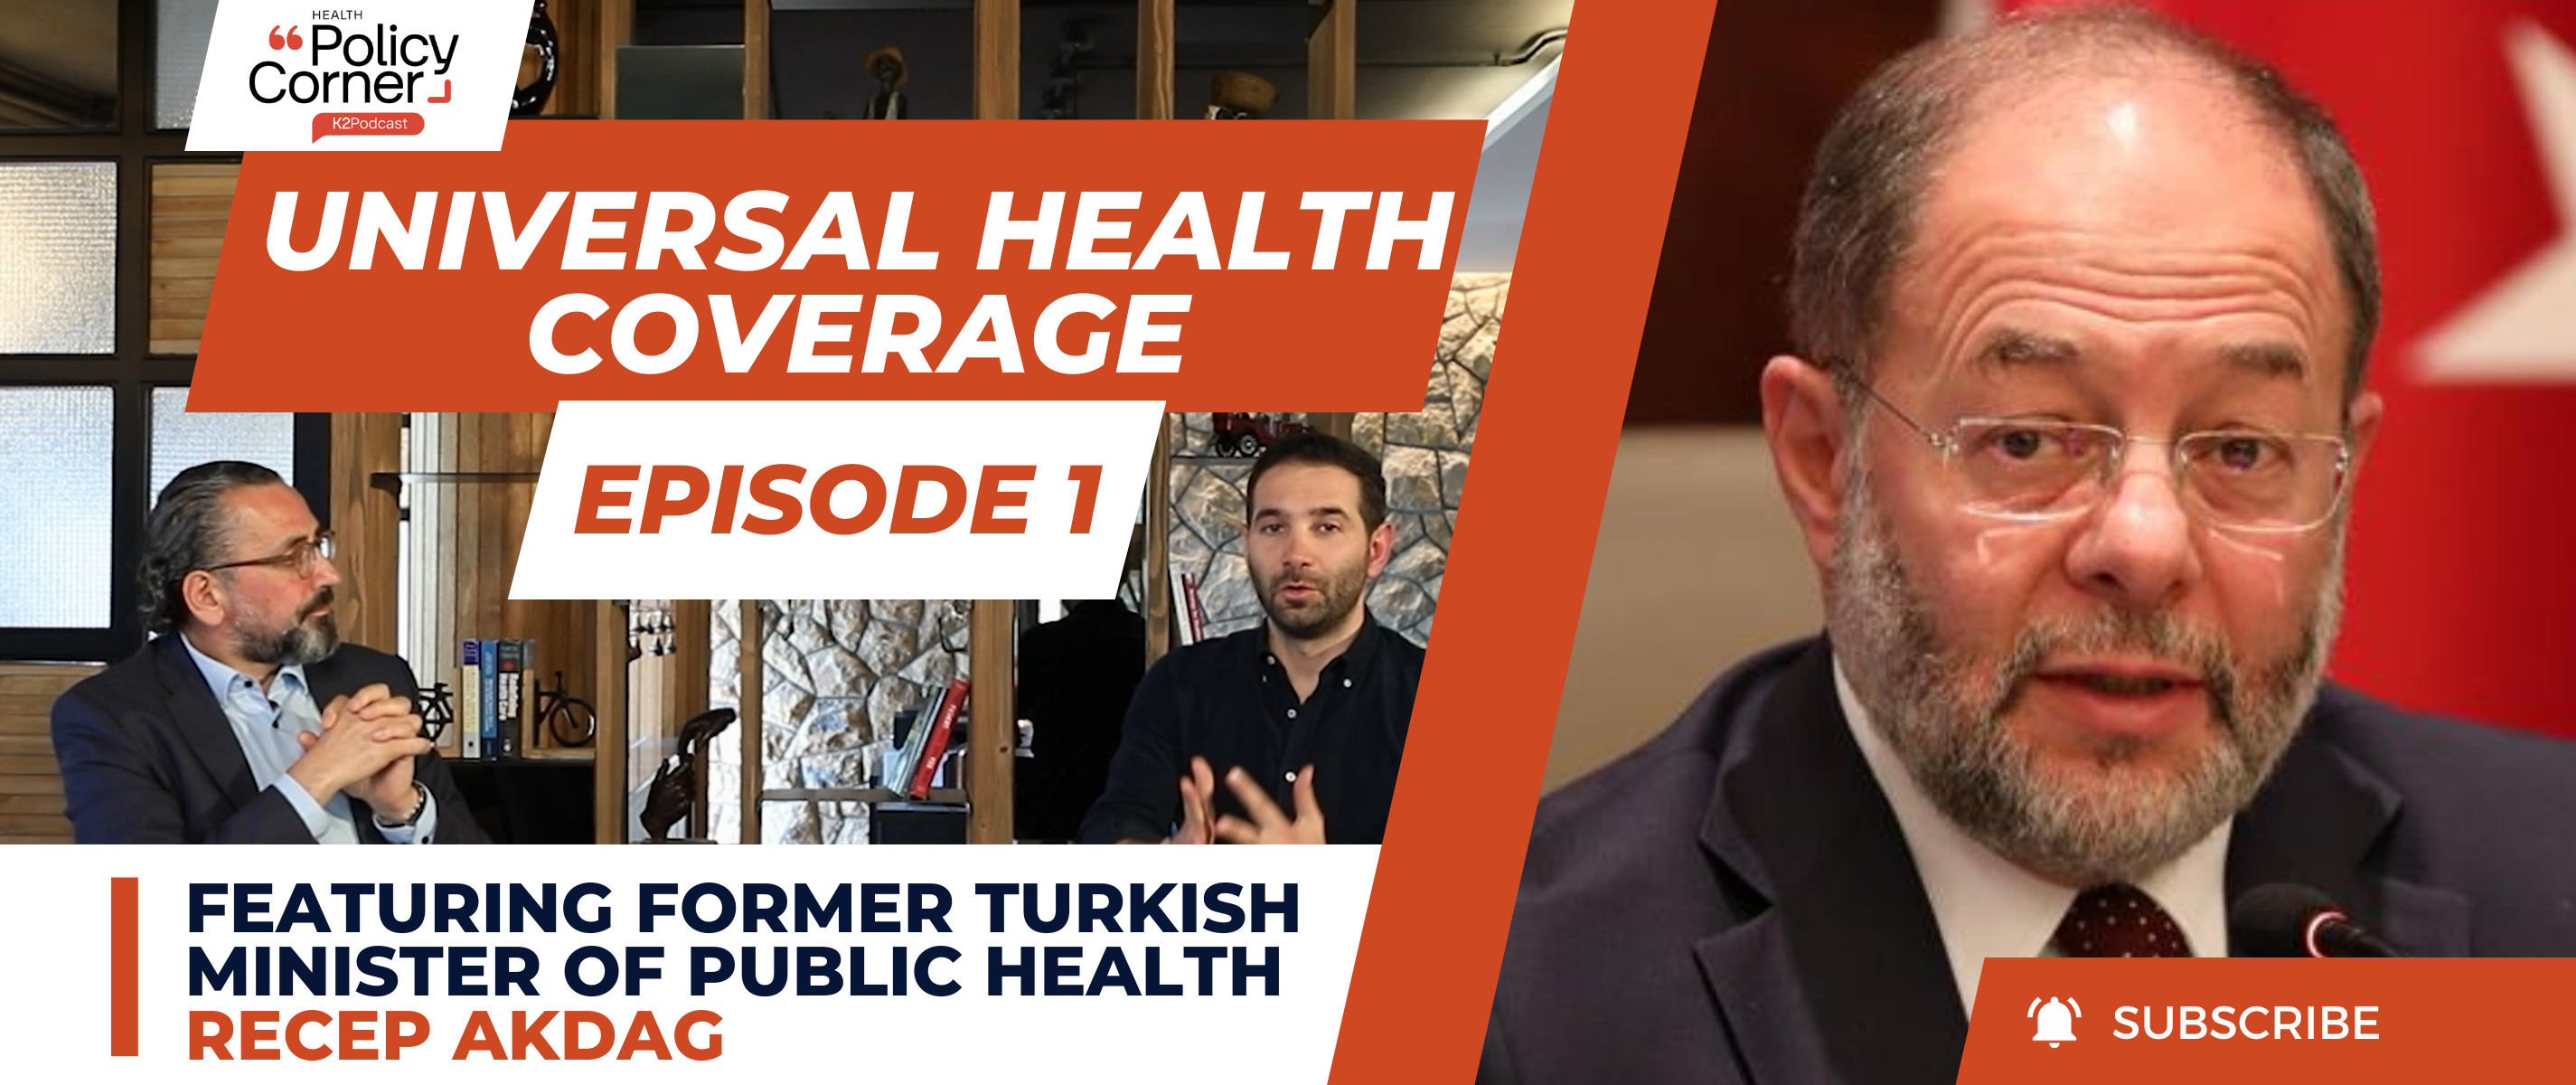 K2P launches the Health Policy Corner Podcast Series